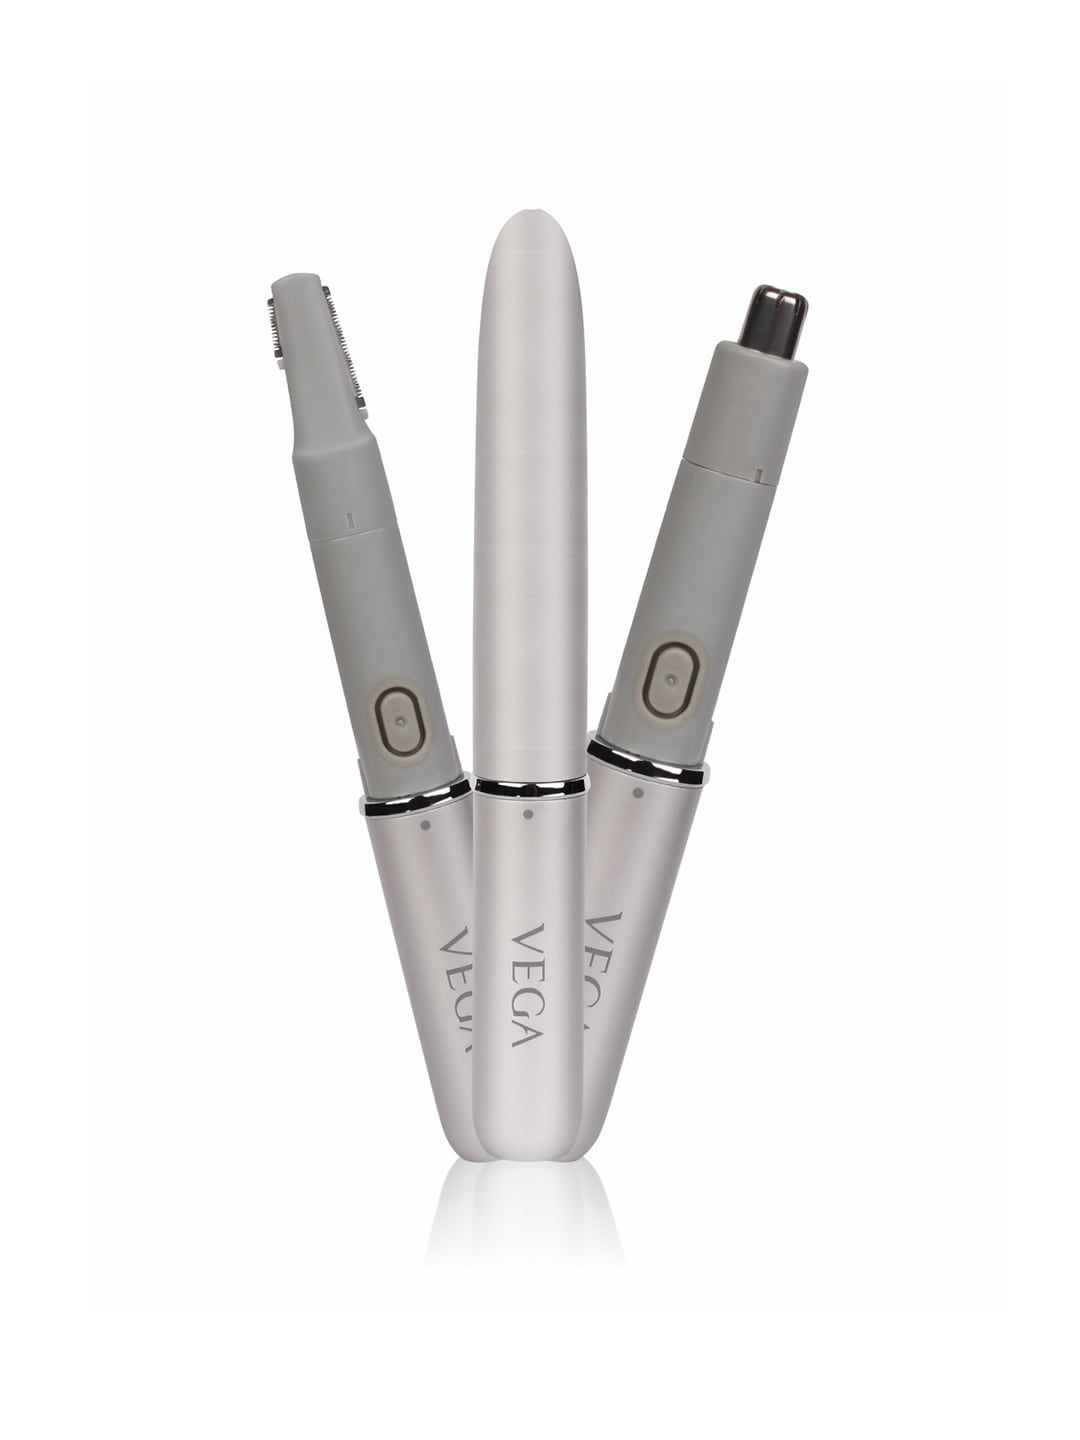 VEGA Unisex VHBT-02 Ezy 2-In-1 Water Resistant Face - Body & Nose Trimmer - Silver-Toned Price in India